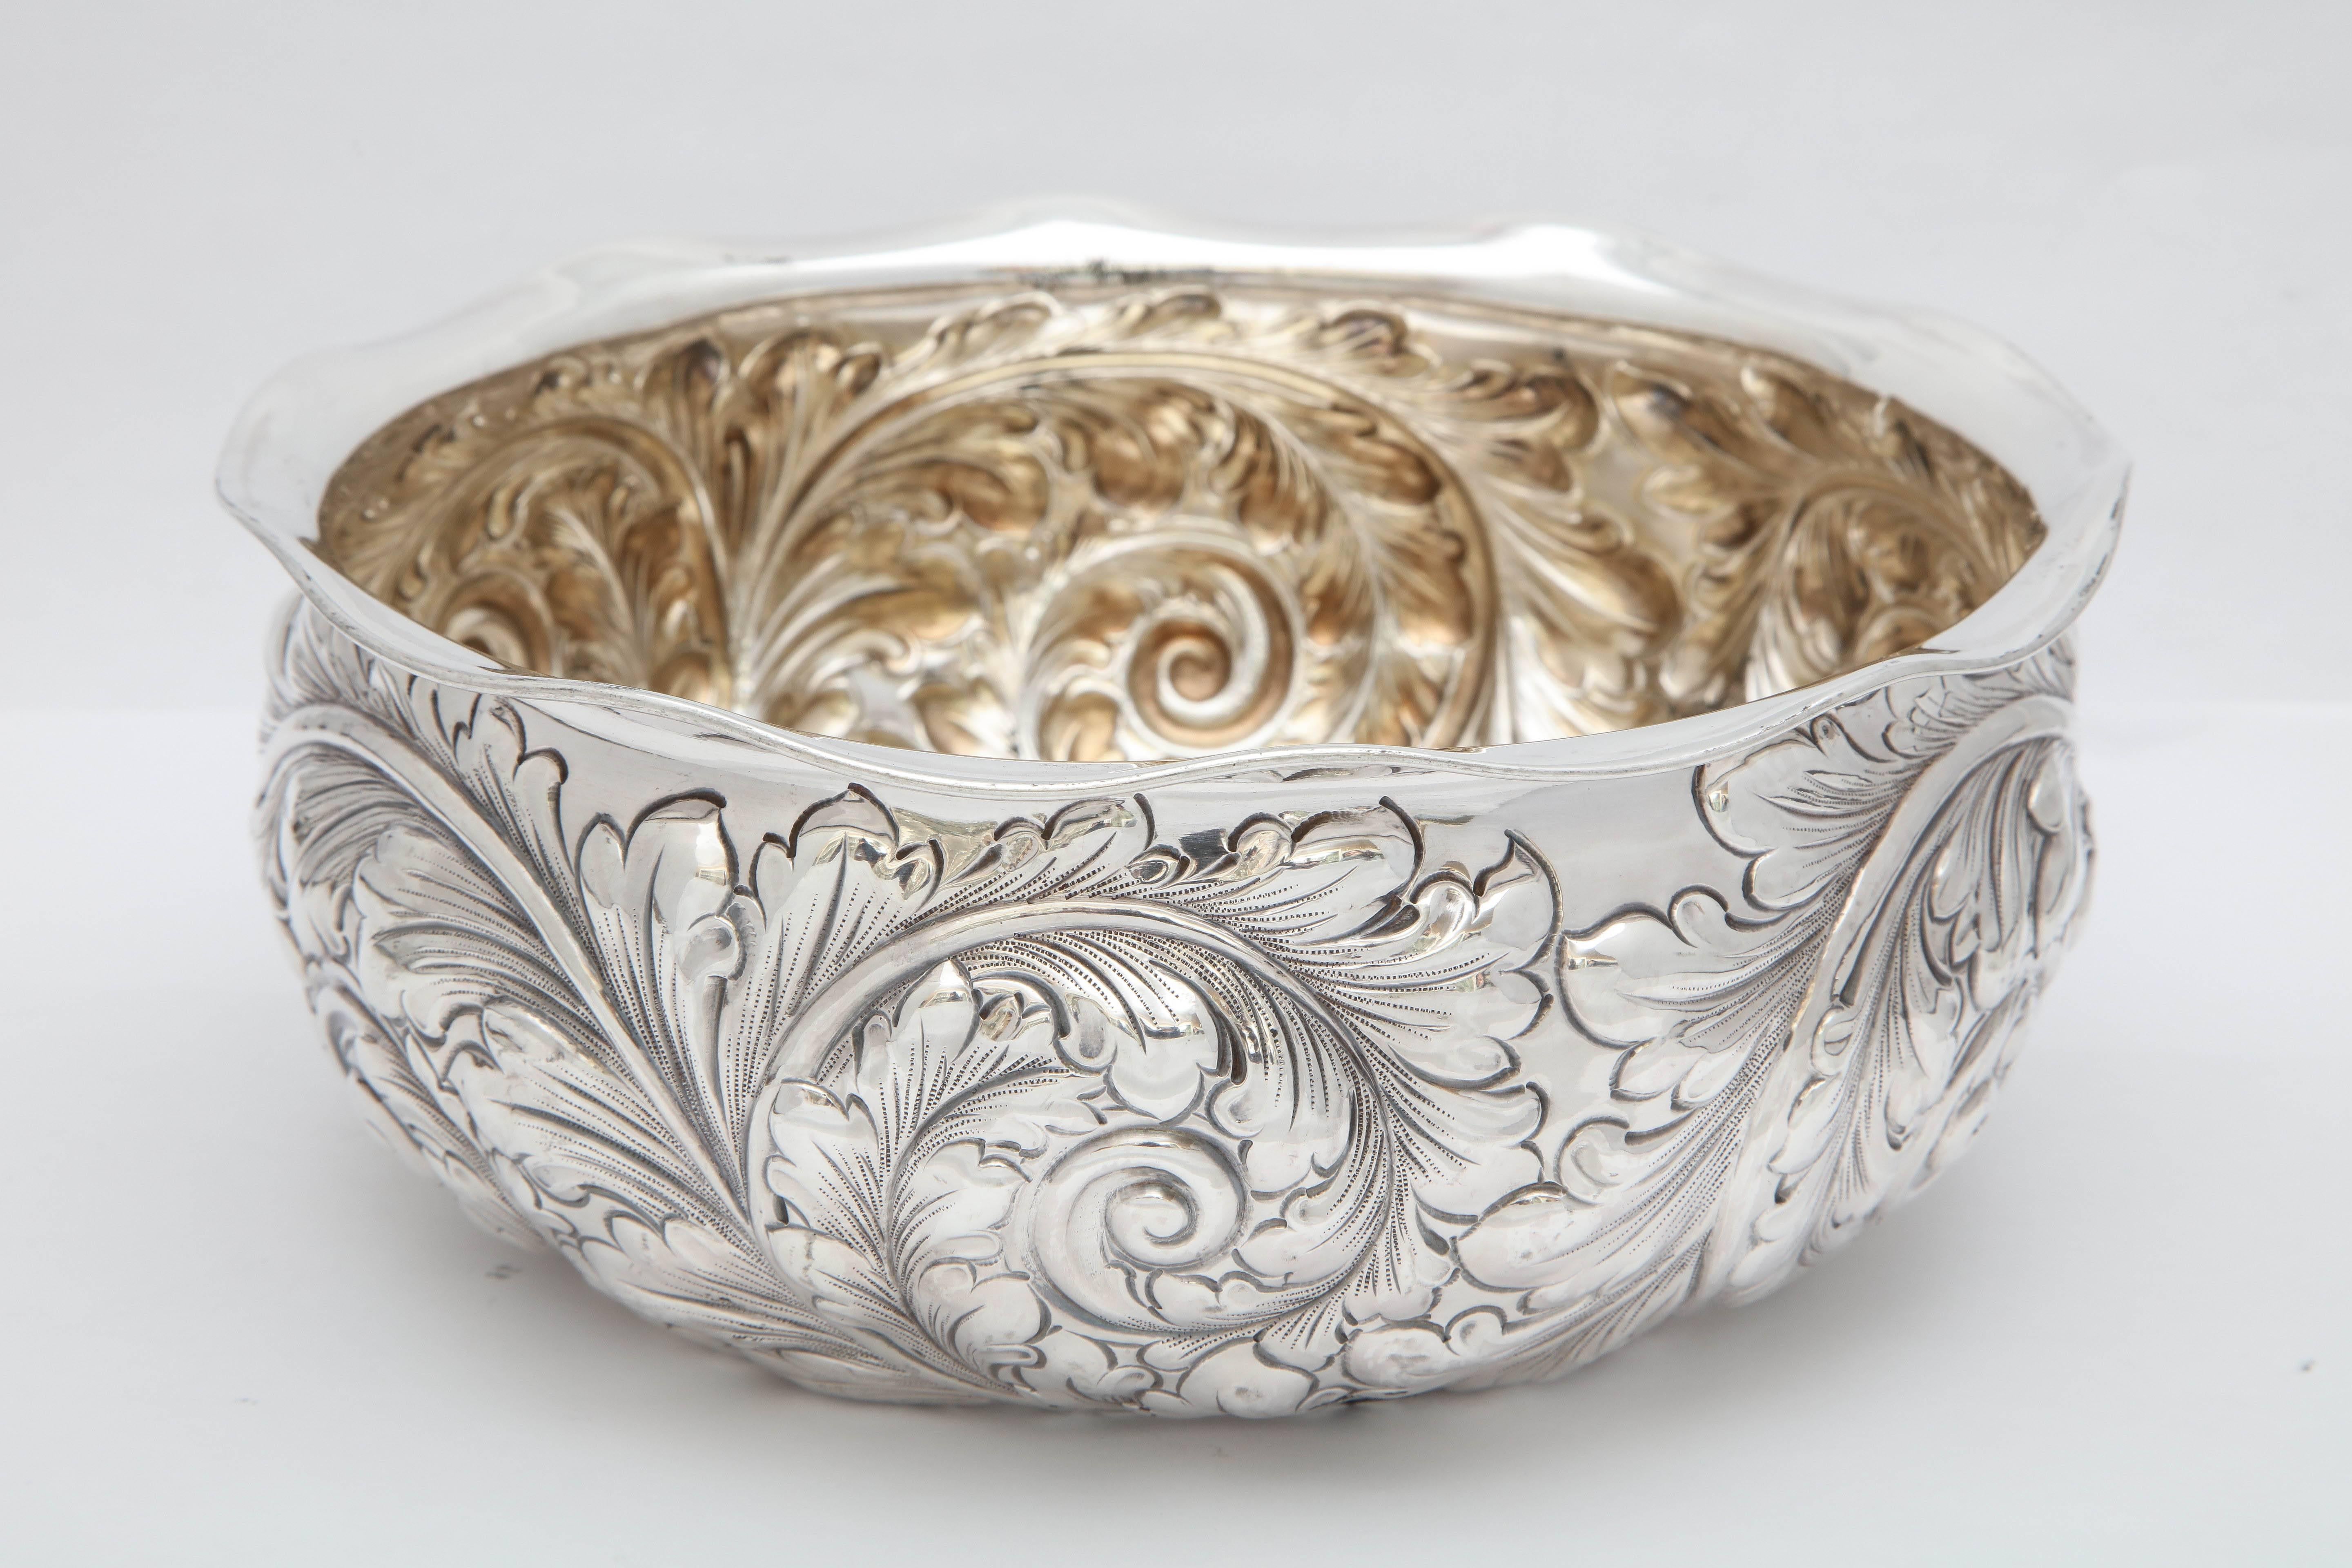 Art Nouveau, sterling silver centrepiece bowl, Gorham Mfg. Co., Providence, Rhode Island, year marked for 1890. Measures: approximately 3 1/2 inches high x 8 1/4 inches diameter. Weighs: approximately 13.565 troy ounces. Gilded interior. Rippled